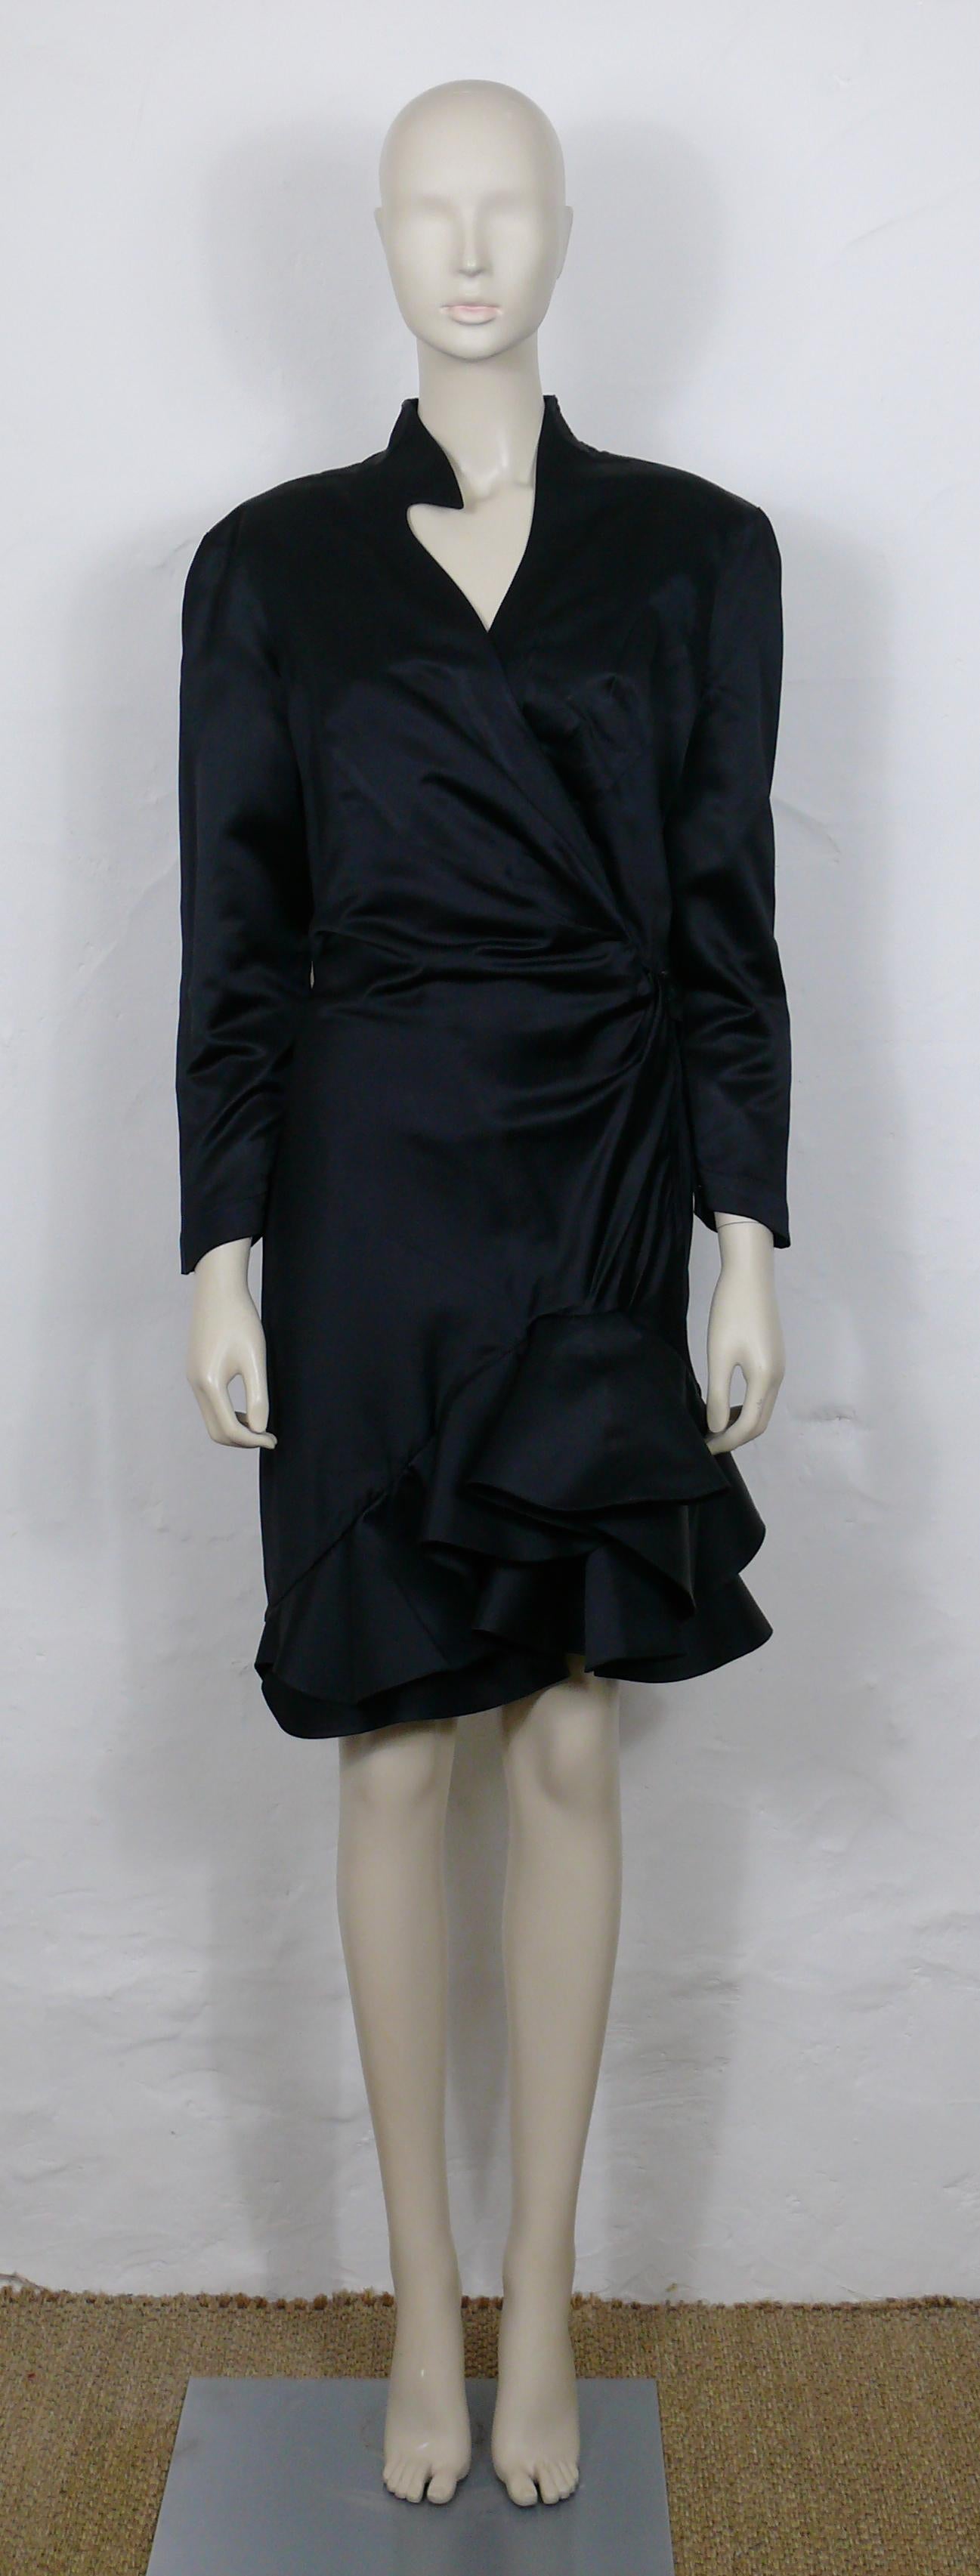 Thierry Mugler Vintage Black Asymetric Bias Cut Ruffled Cocktail Dress In Fair Condition For Sale In Nice, FR